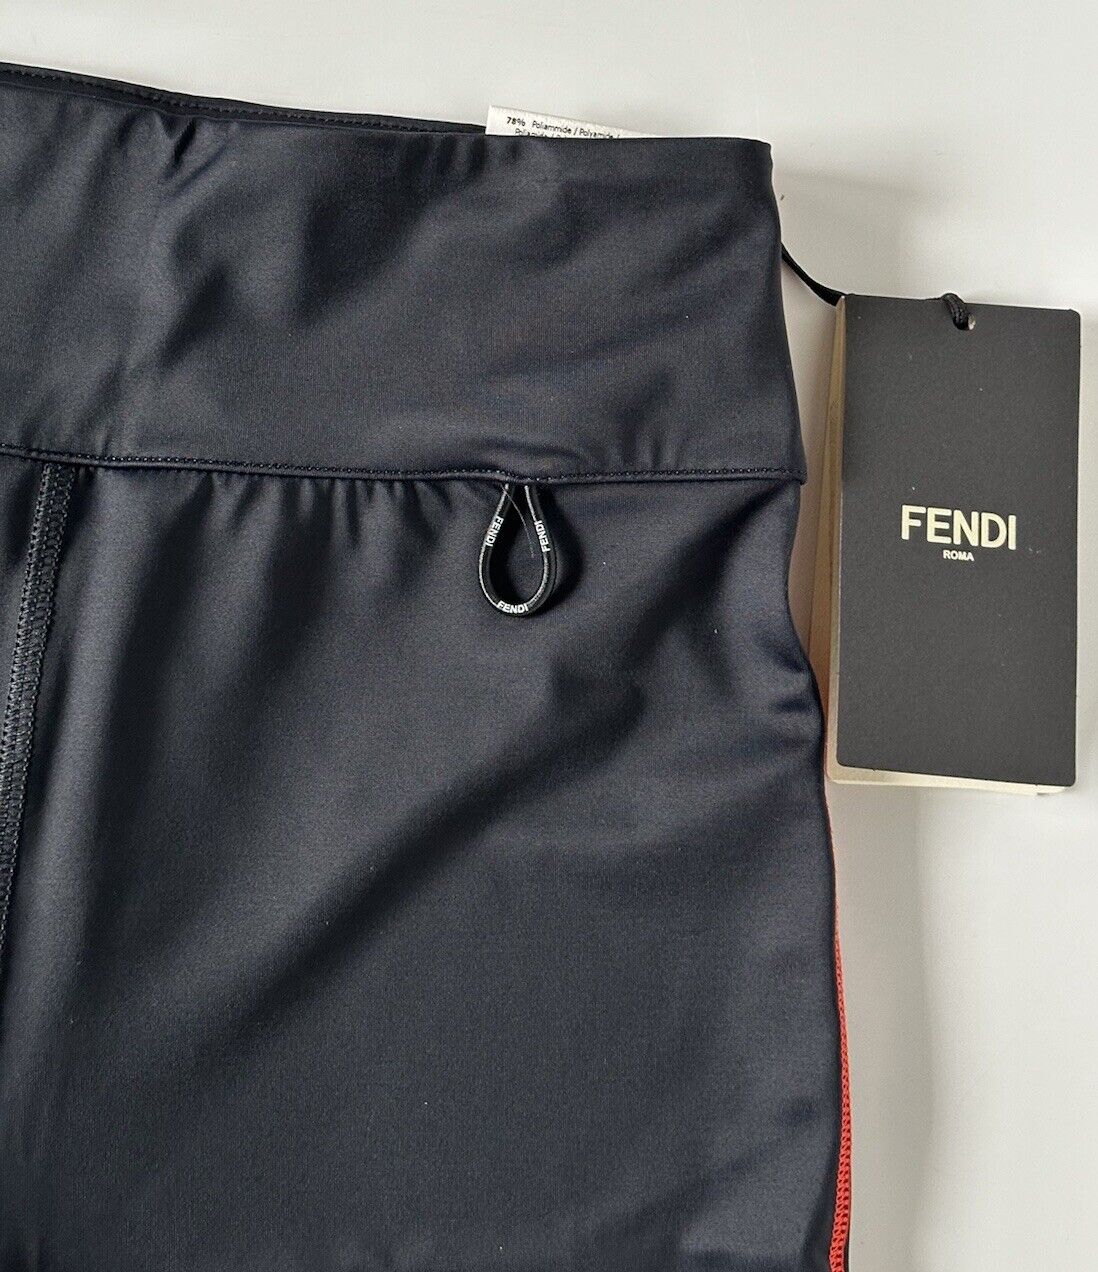 NWT $430 Fendi Women's Track Shorts Large Black  Made in Italy FAB309